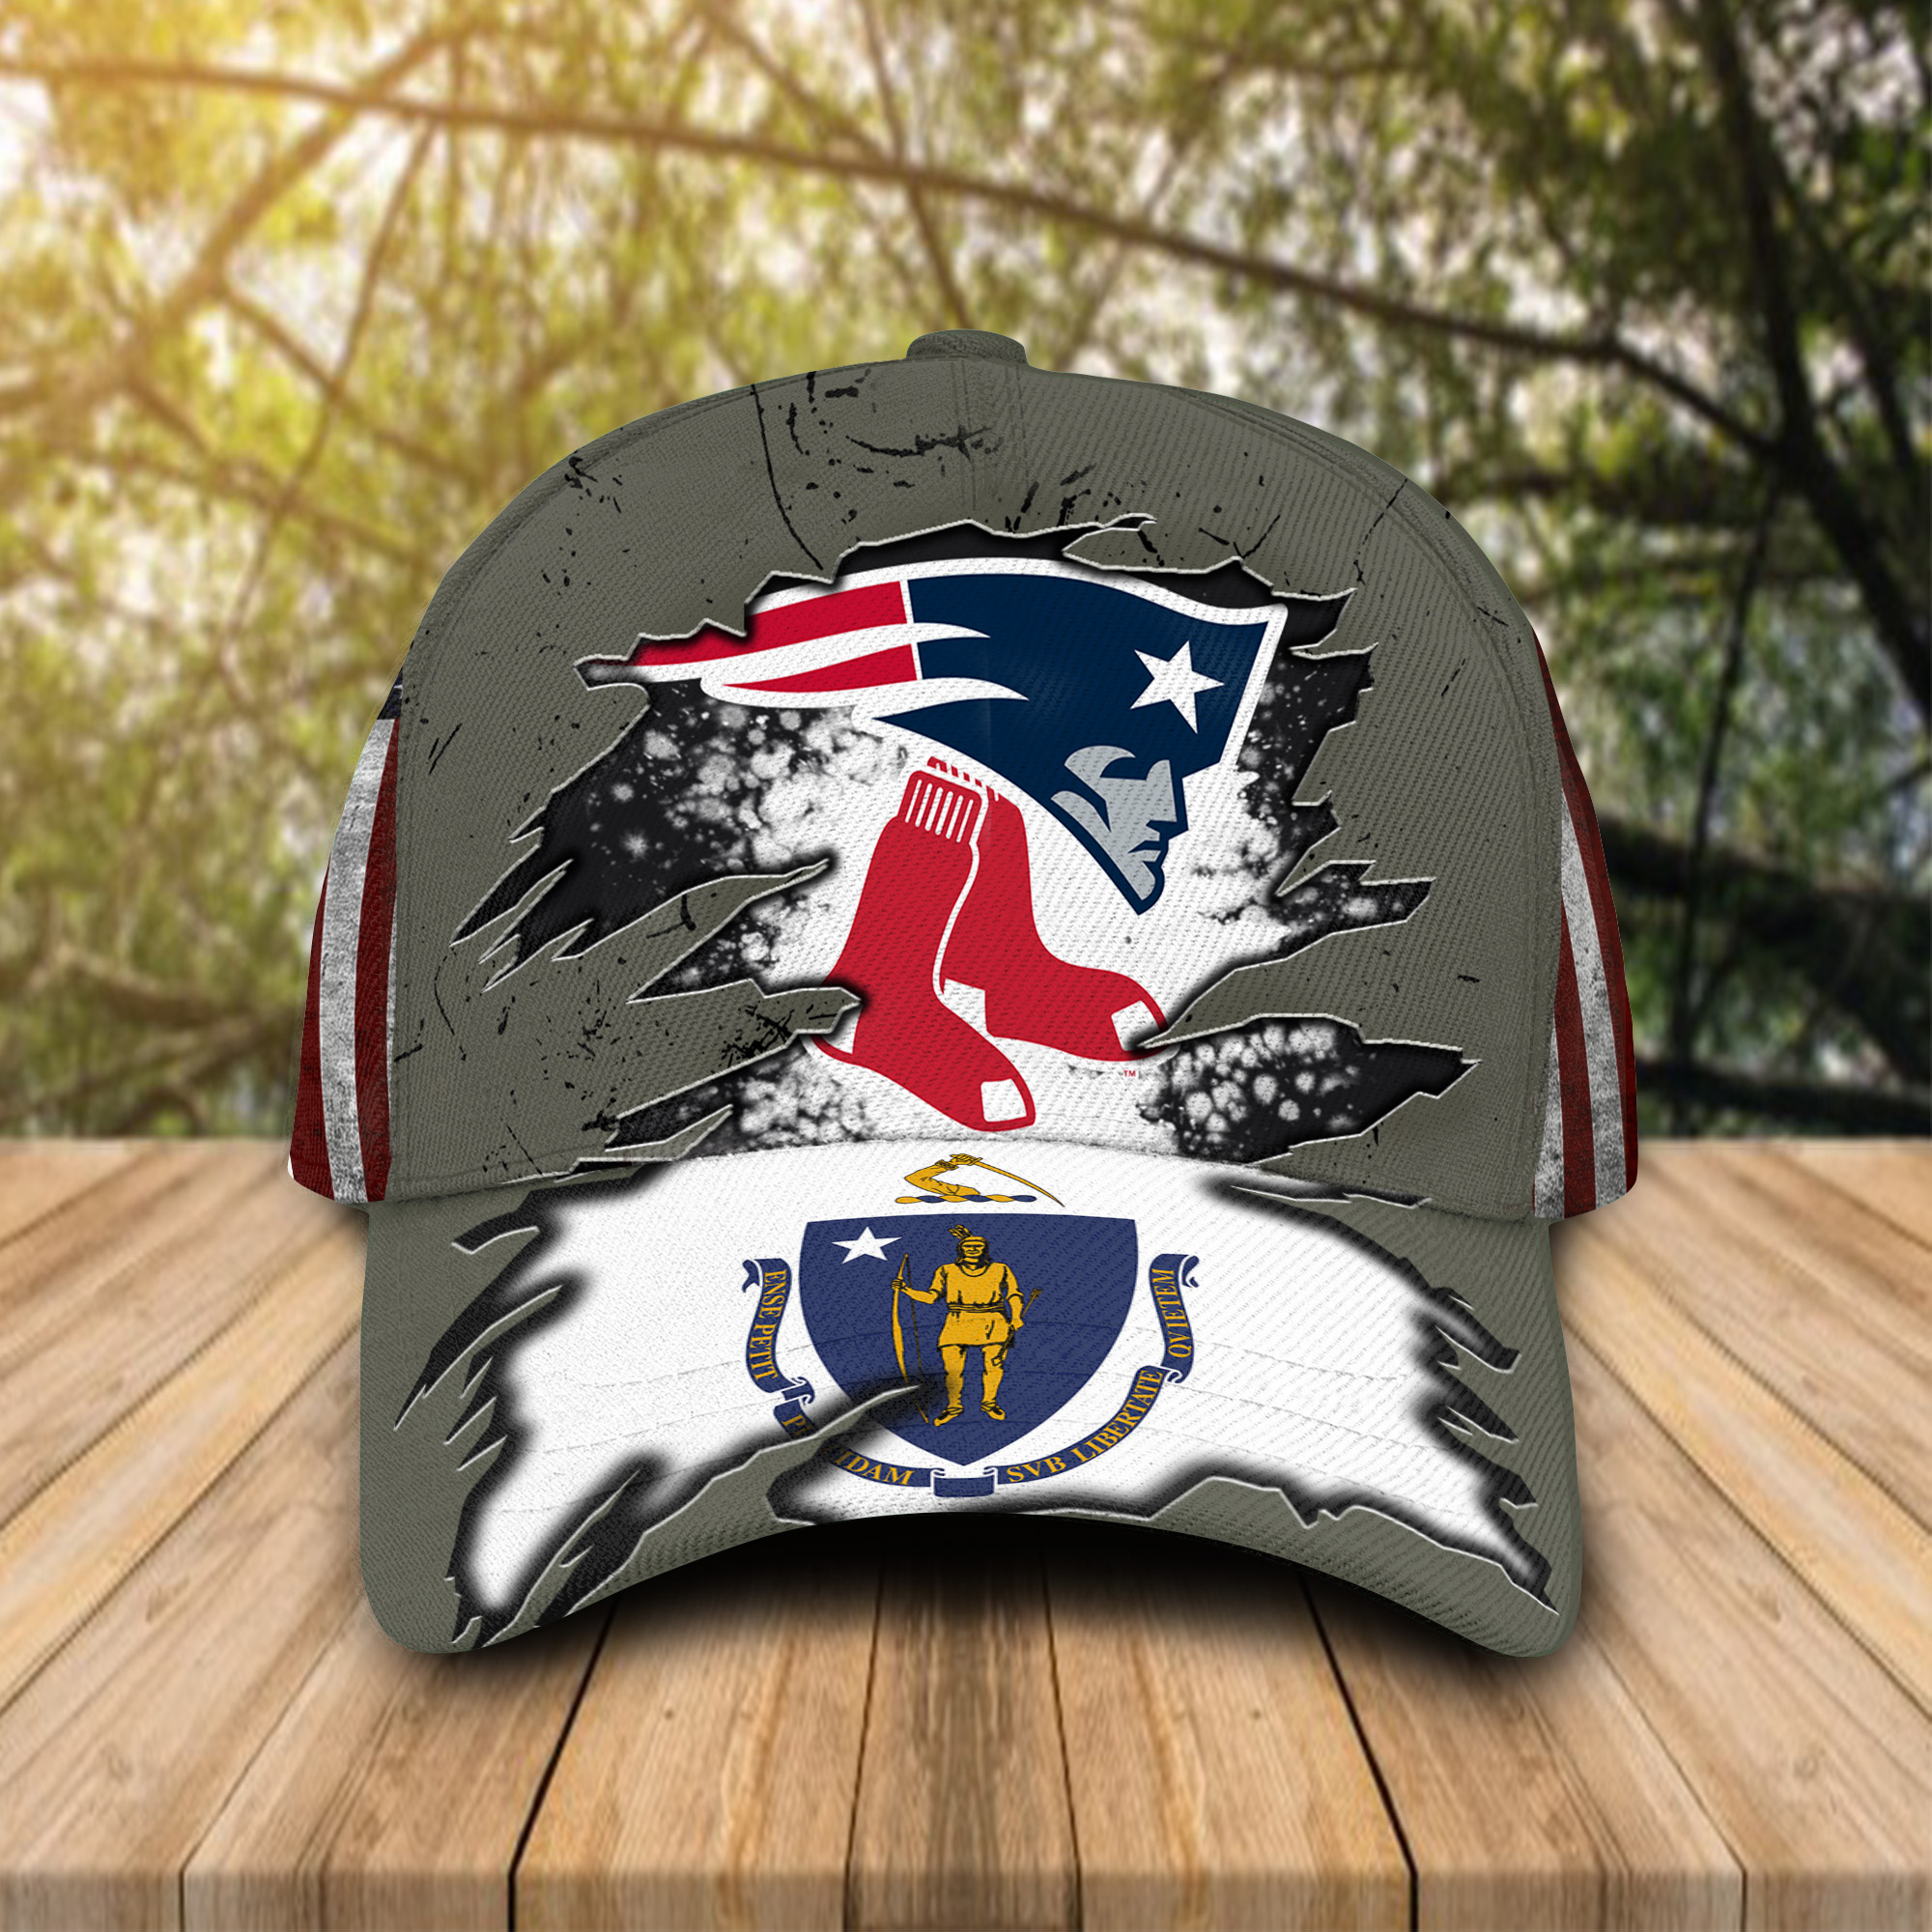 New England Patriots And Boston Red Sox Caps & Hats